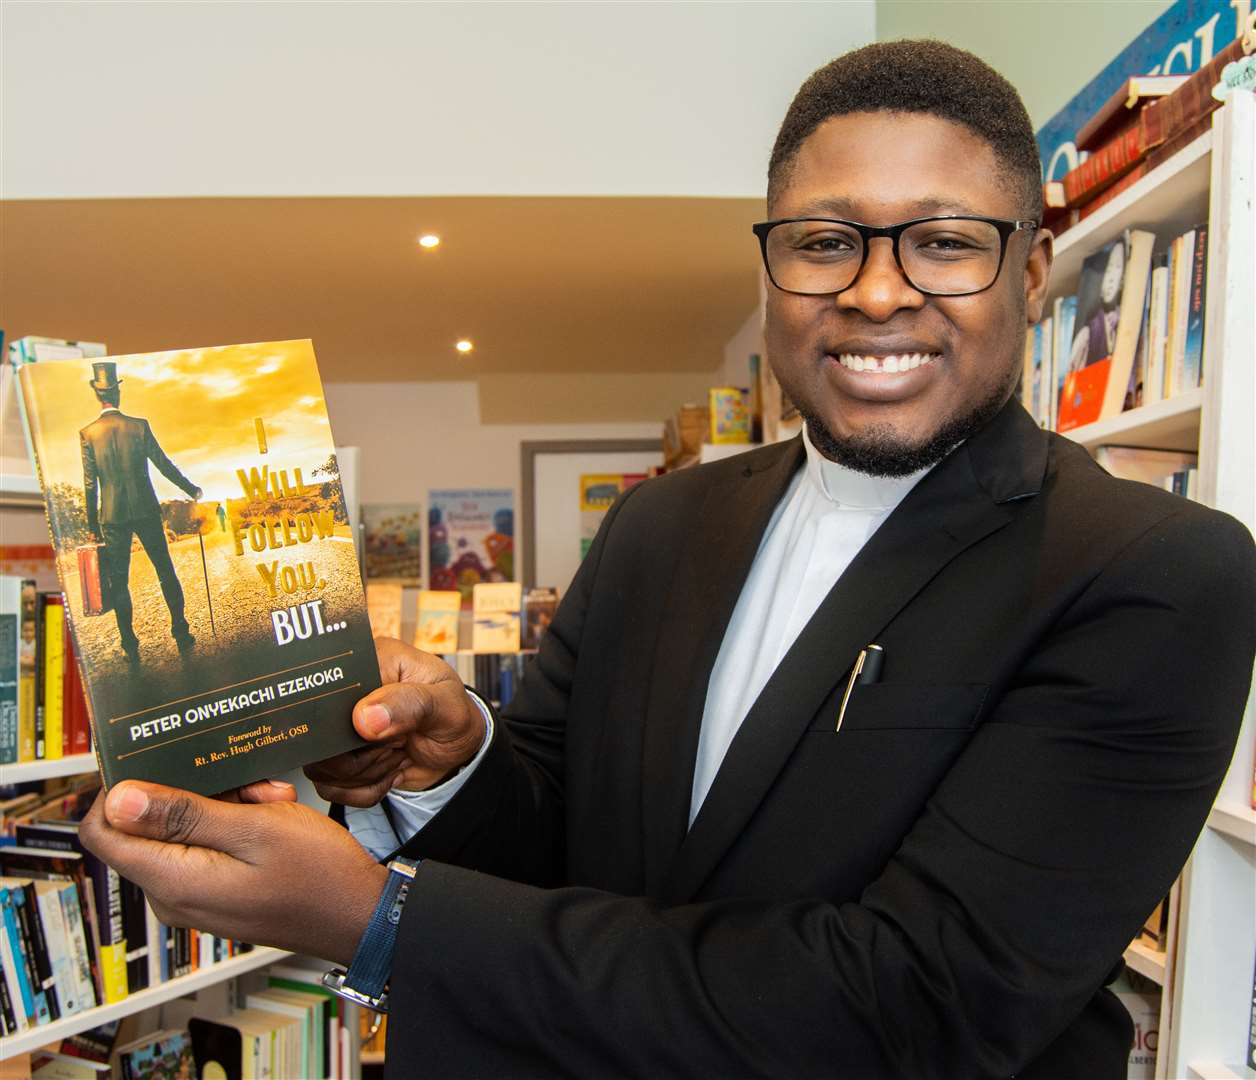 Fr Peter Ezekoka with his book I Will Follow You, But. Picture: Daniel Forsyth